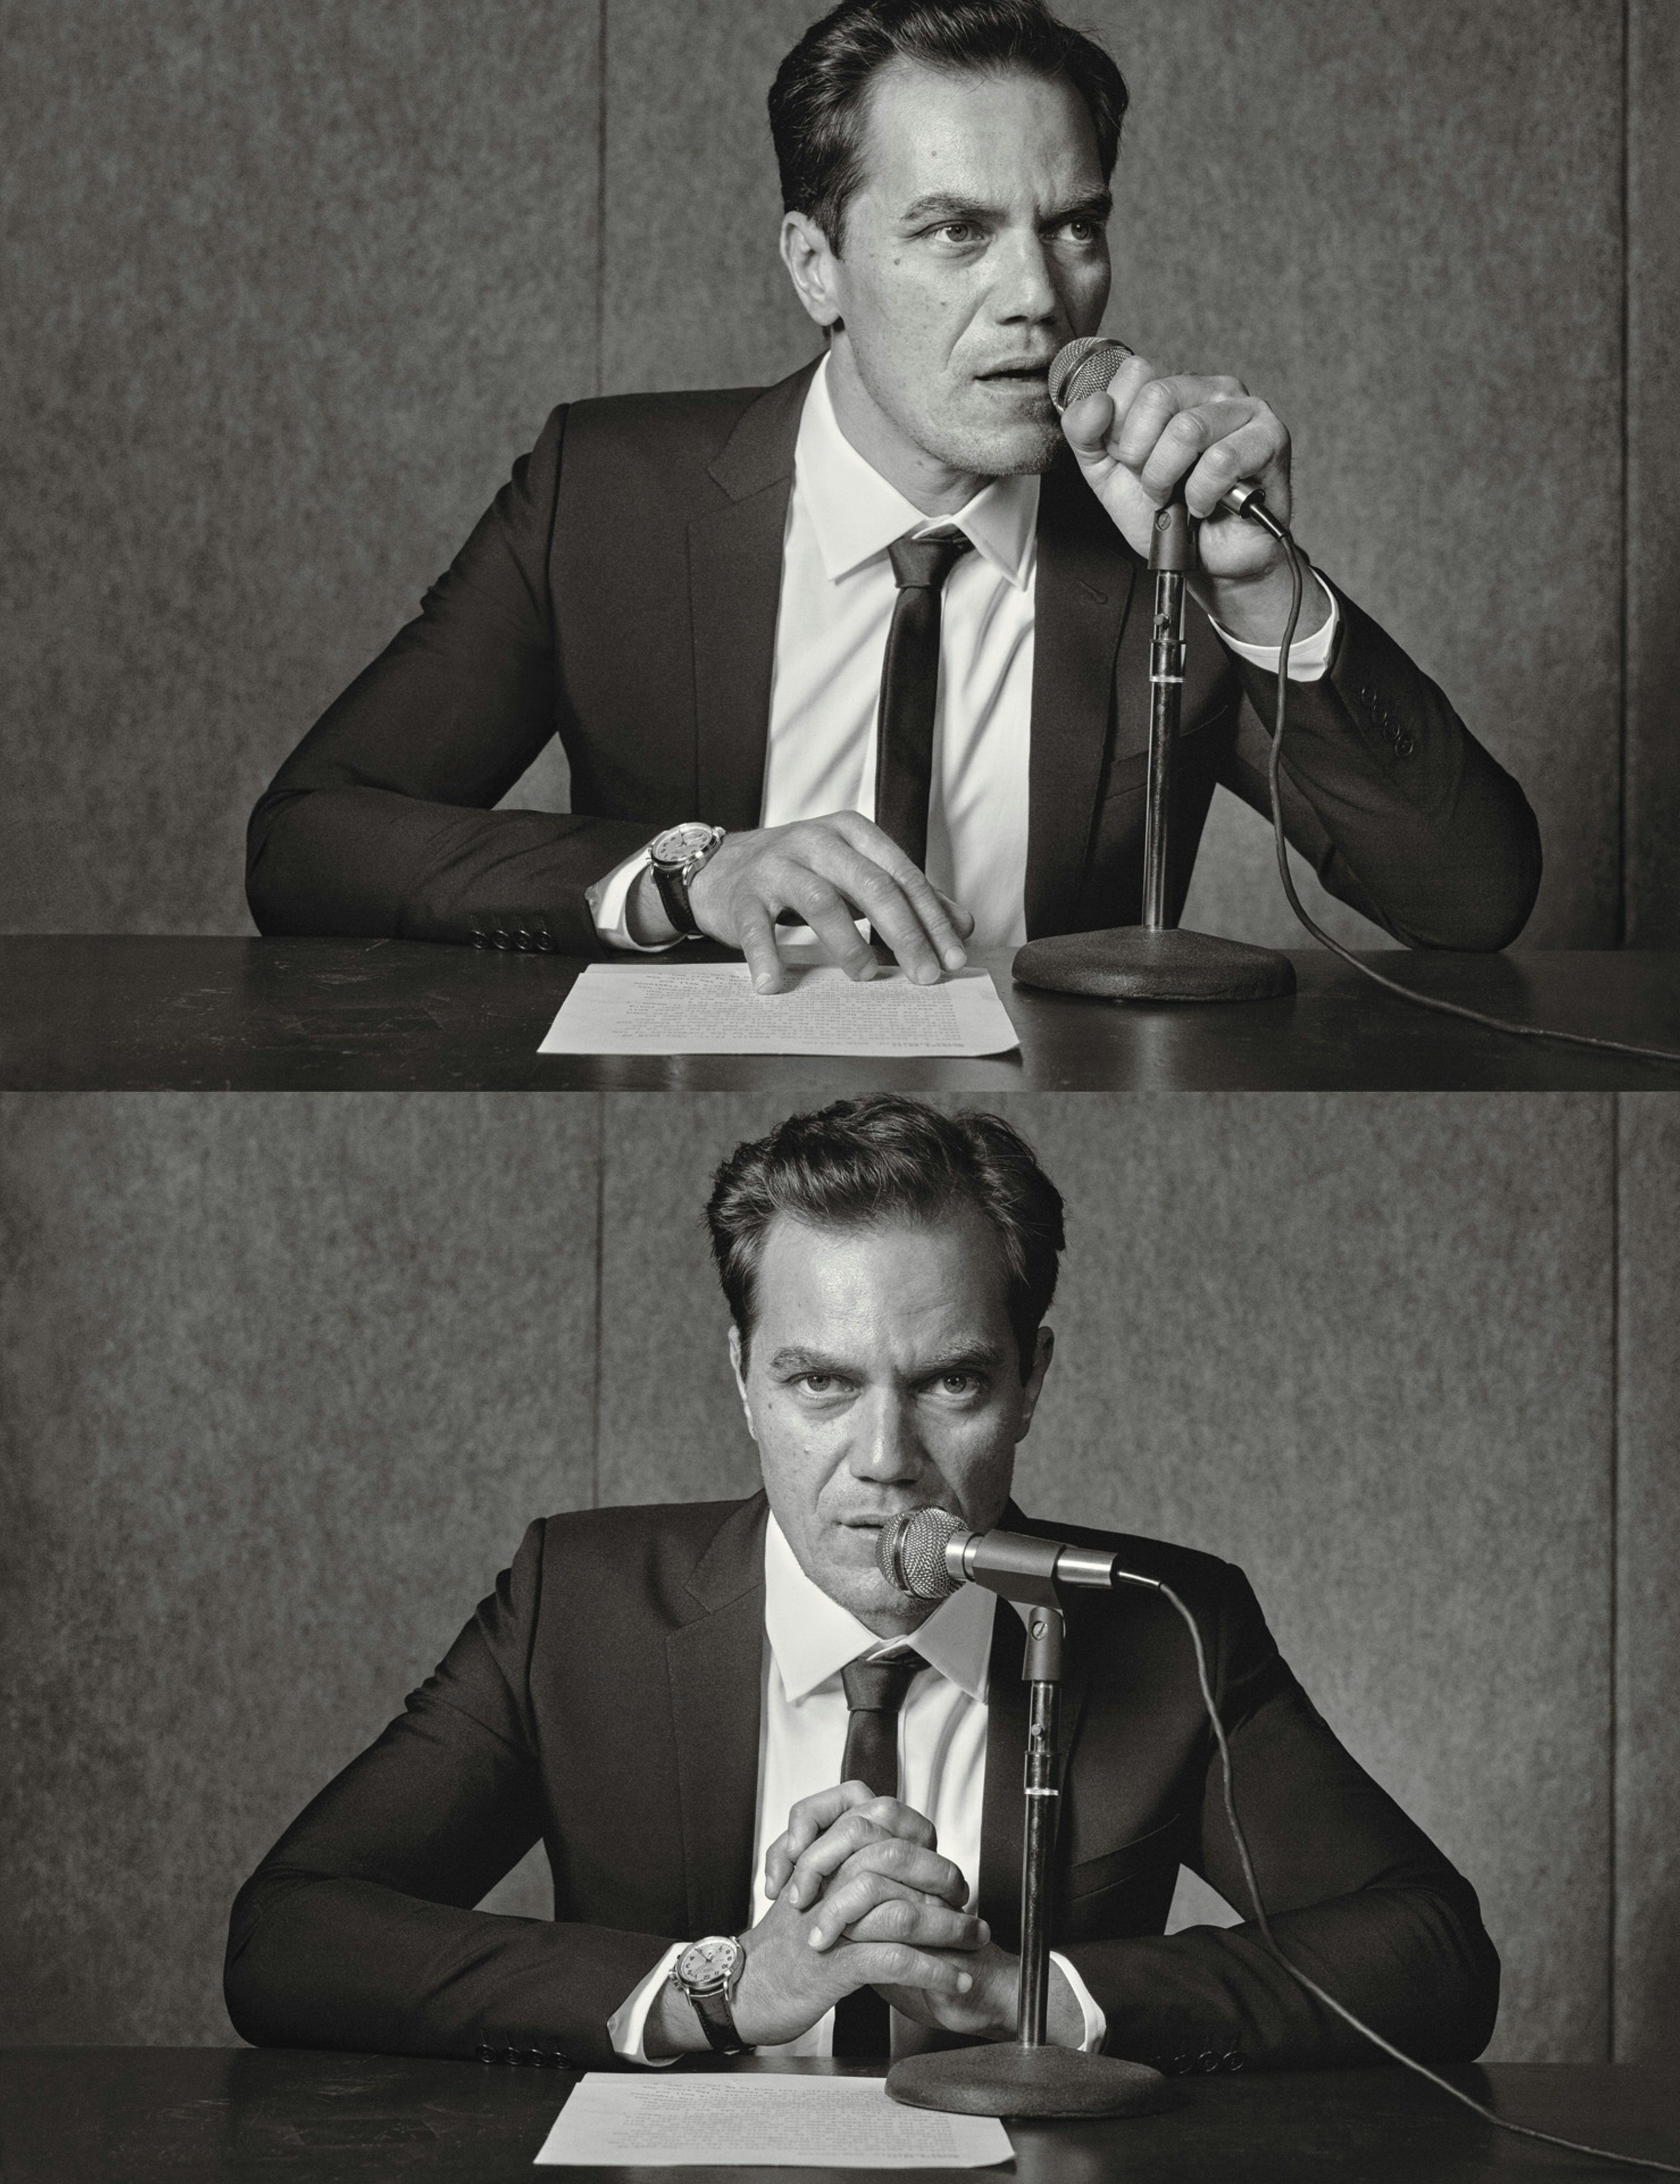 Michael Shannon: Movie Love Scenes Are Like Real Sex, Only Without